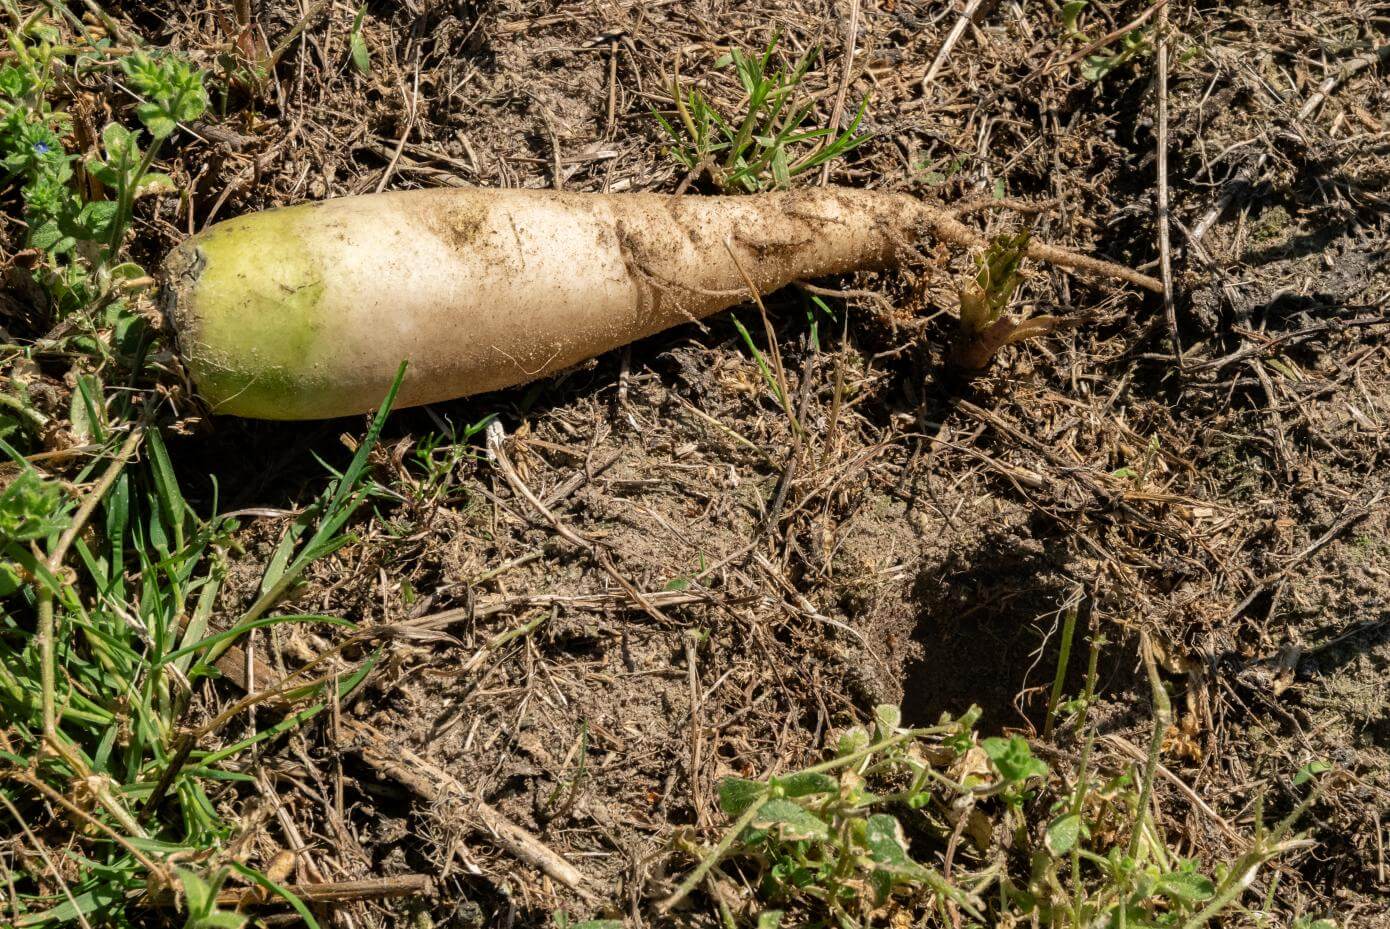 FragiBlaster Cover Crop Radish, close-up of tuber and hole it created